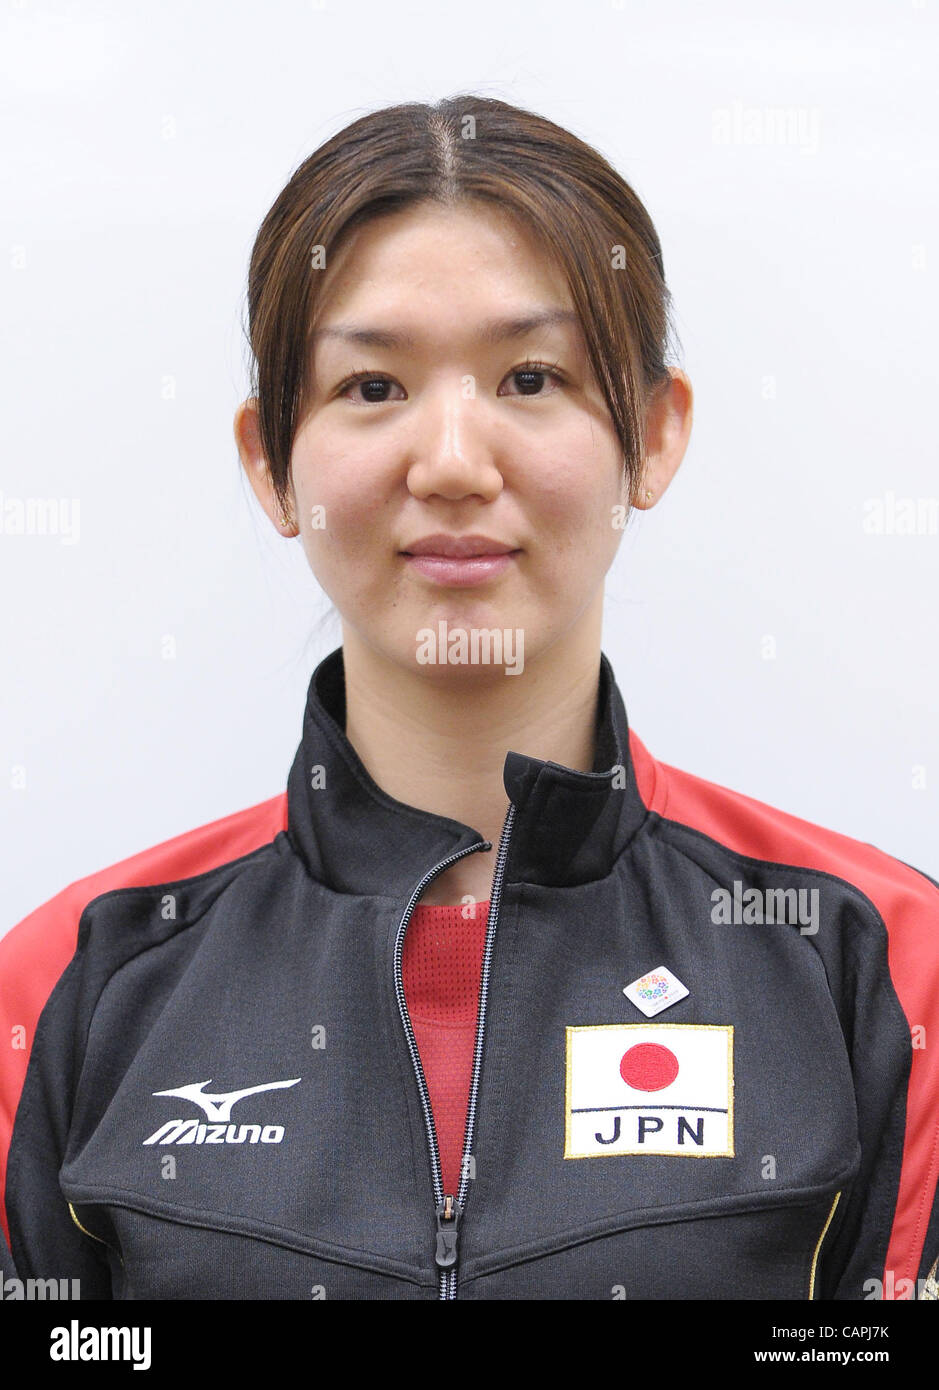 Japan Volleyball Woman High Resolution Stock Photography and Images - Alamy